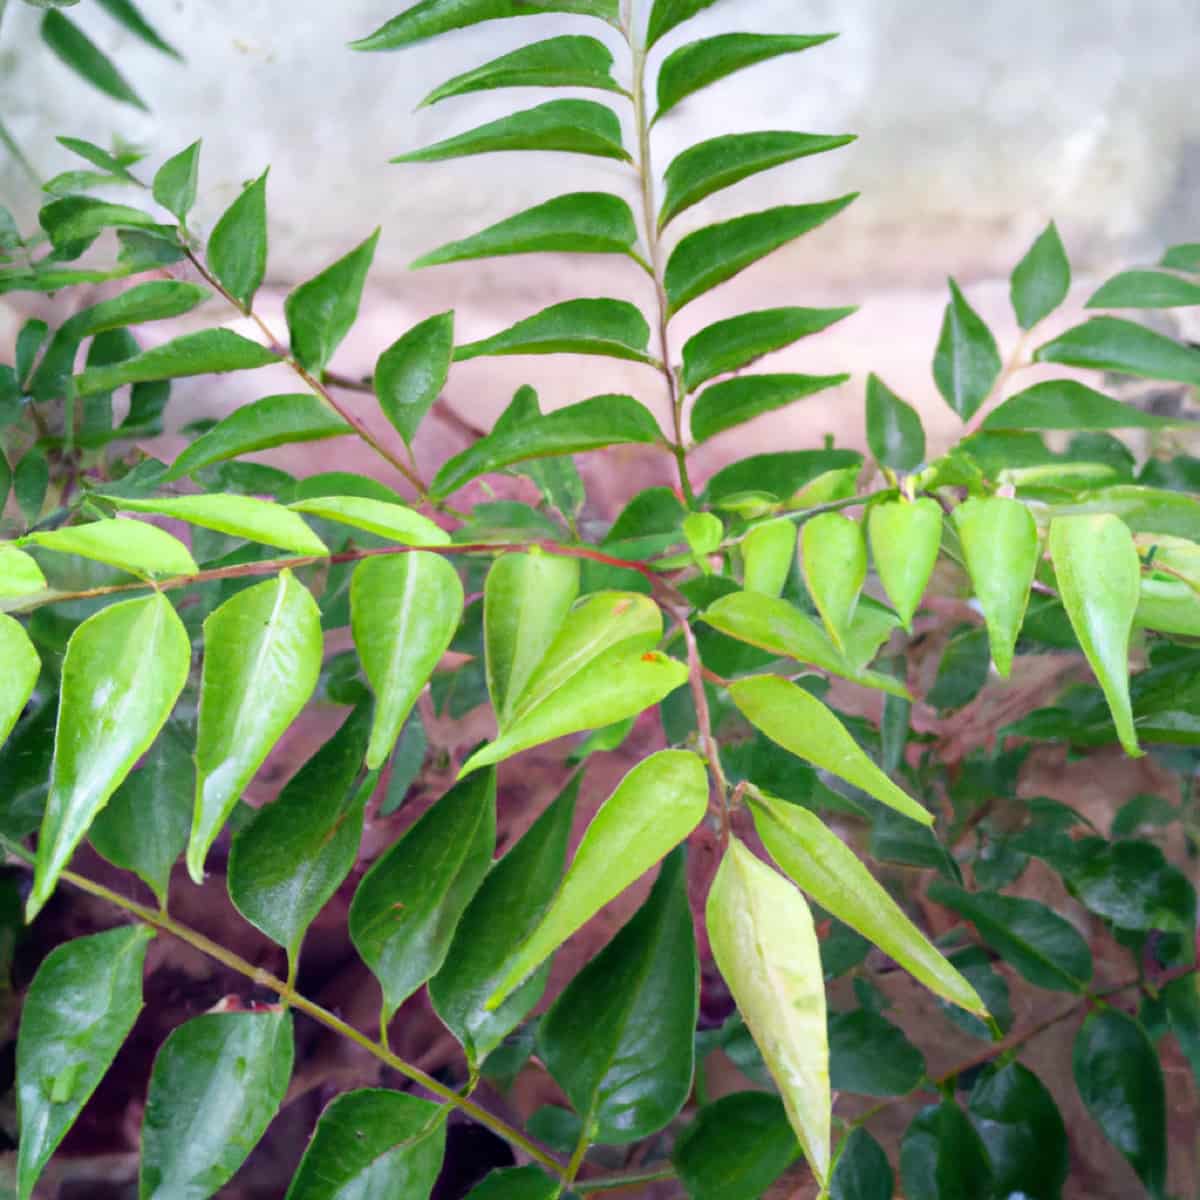 Common Problems With Curry Leaf Plant